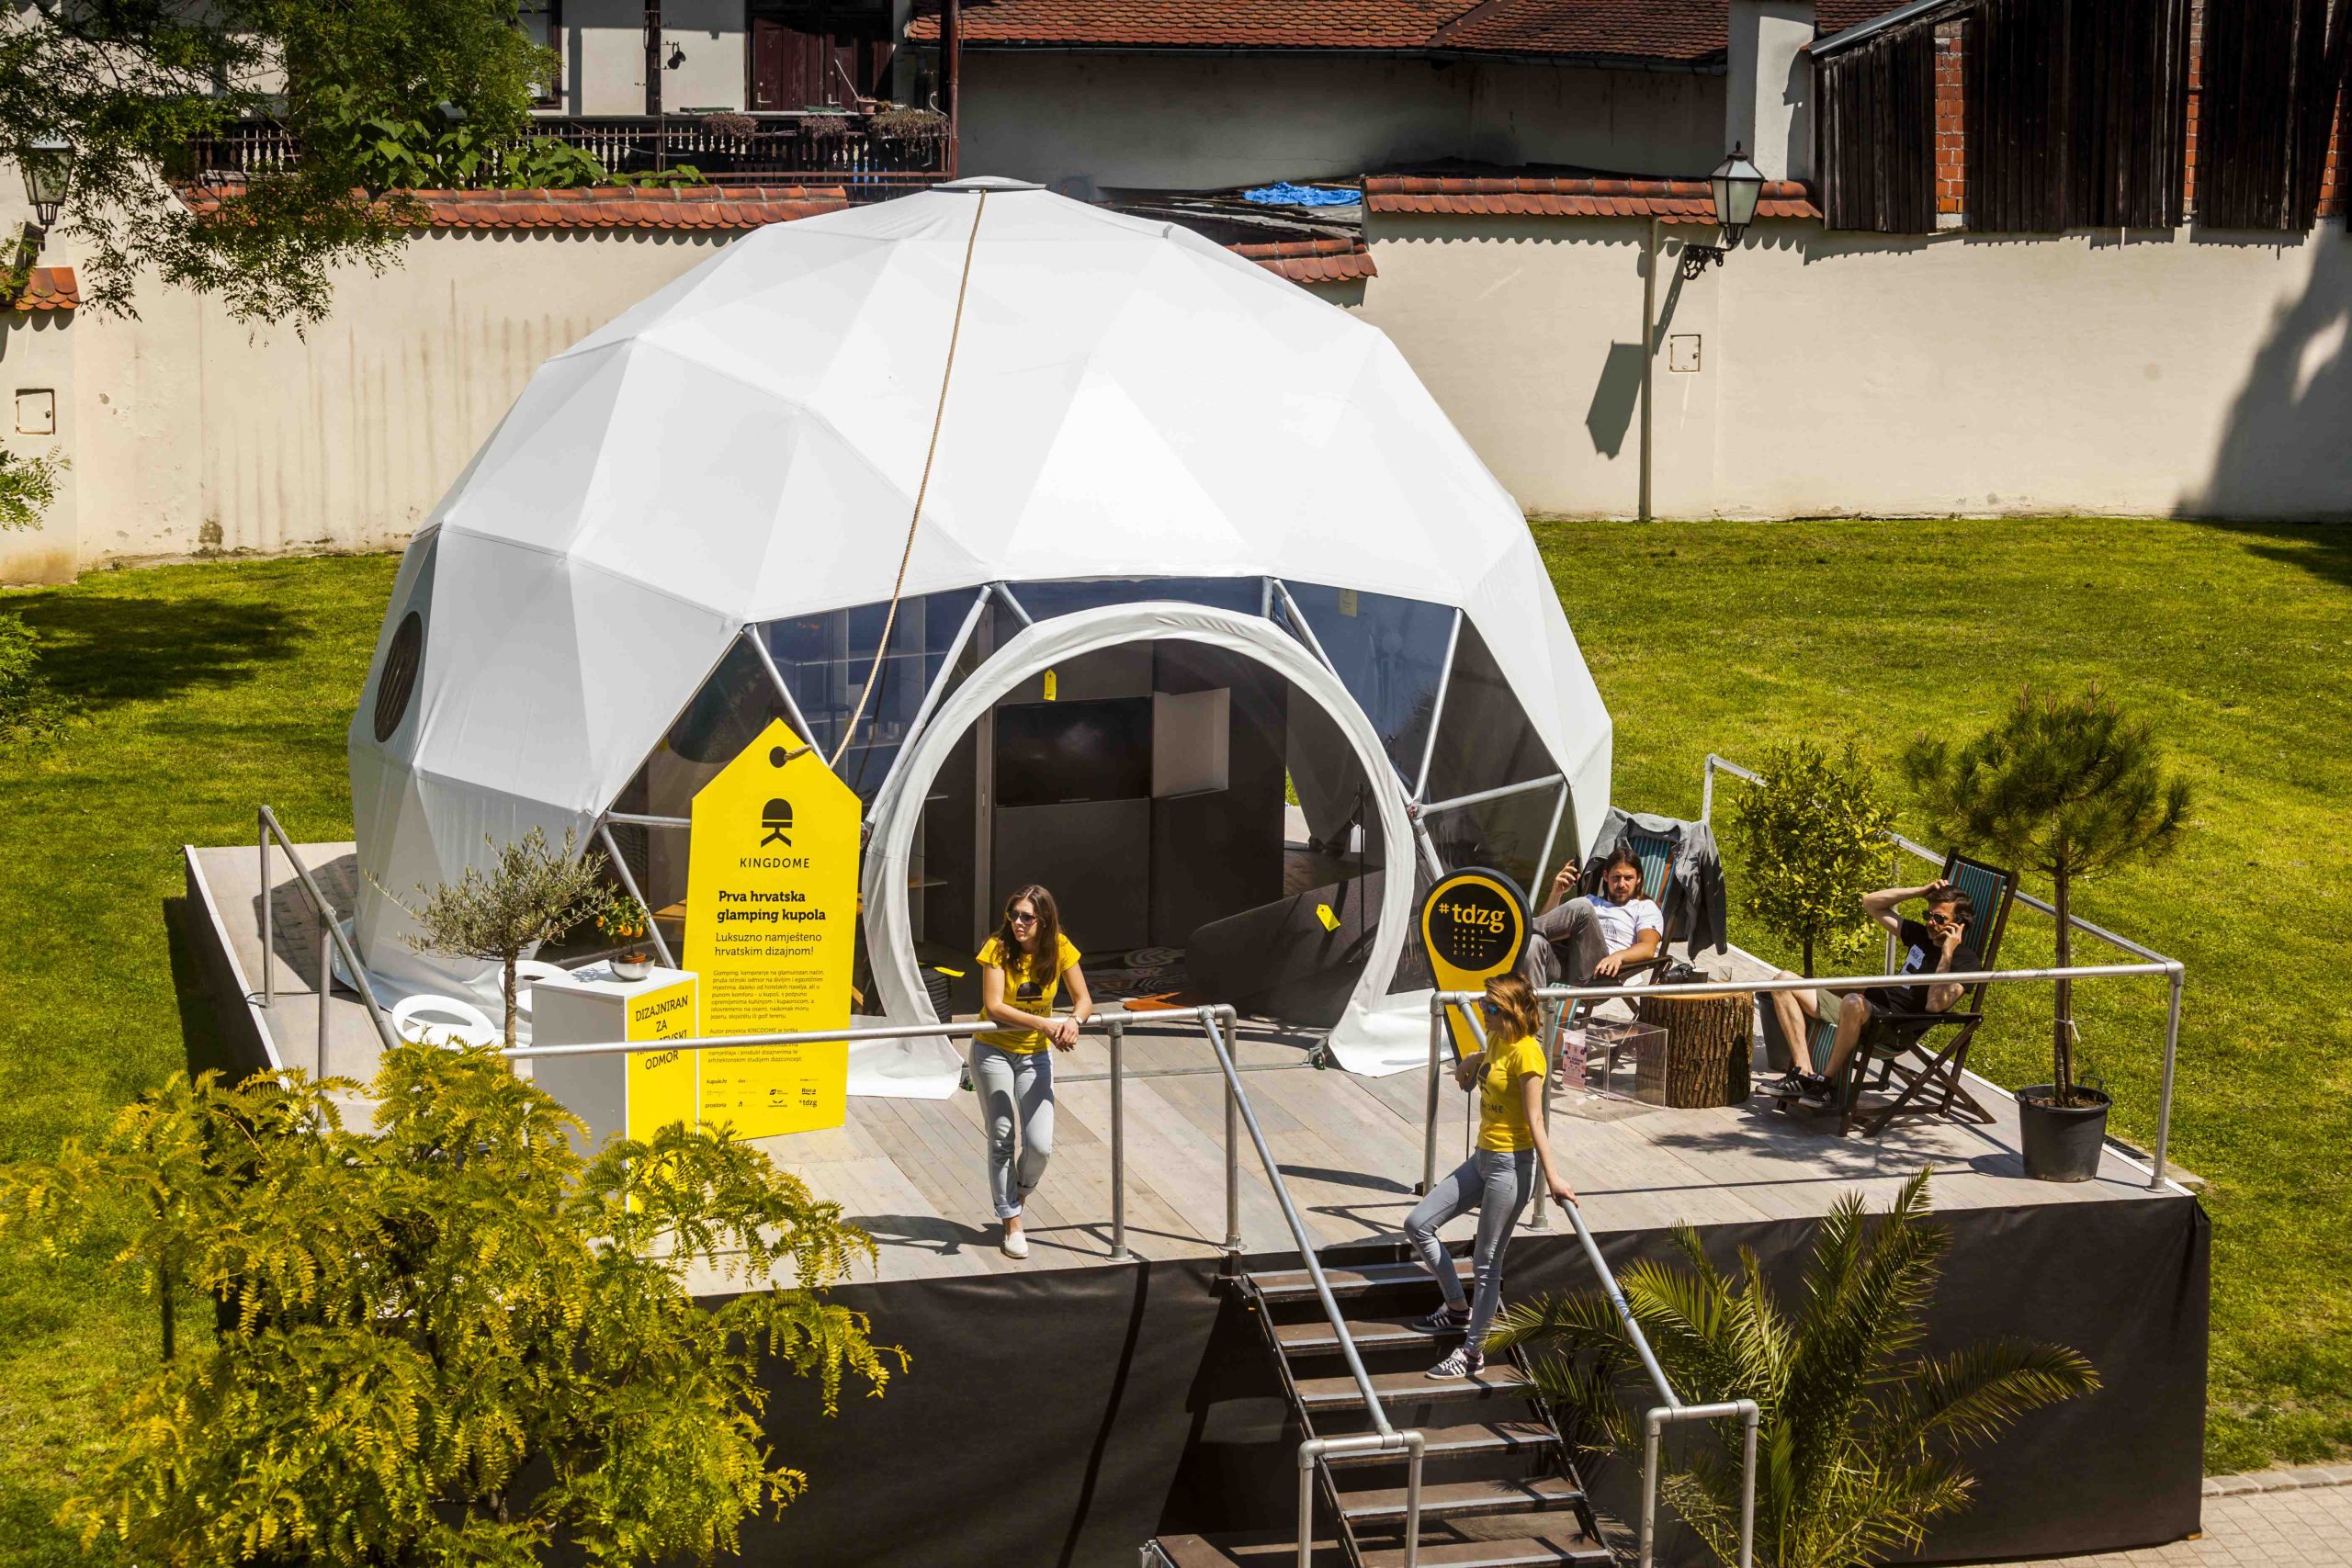 [PHOTOS] A Look Inside the First Croatian Glamping Dome